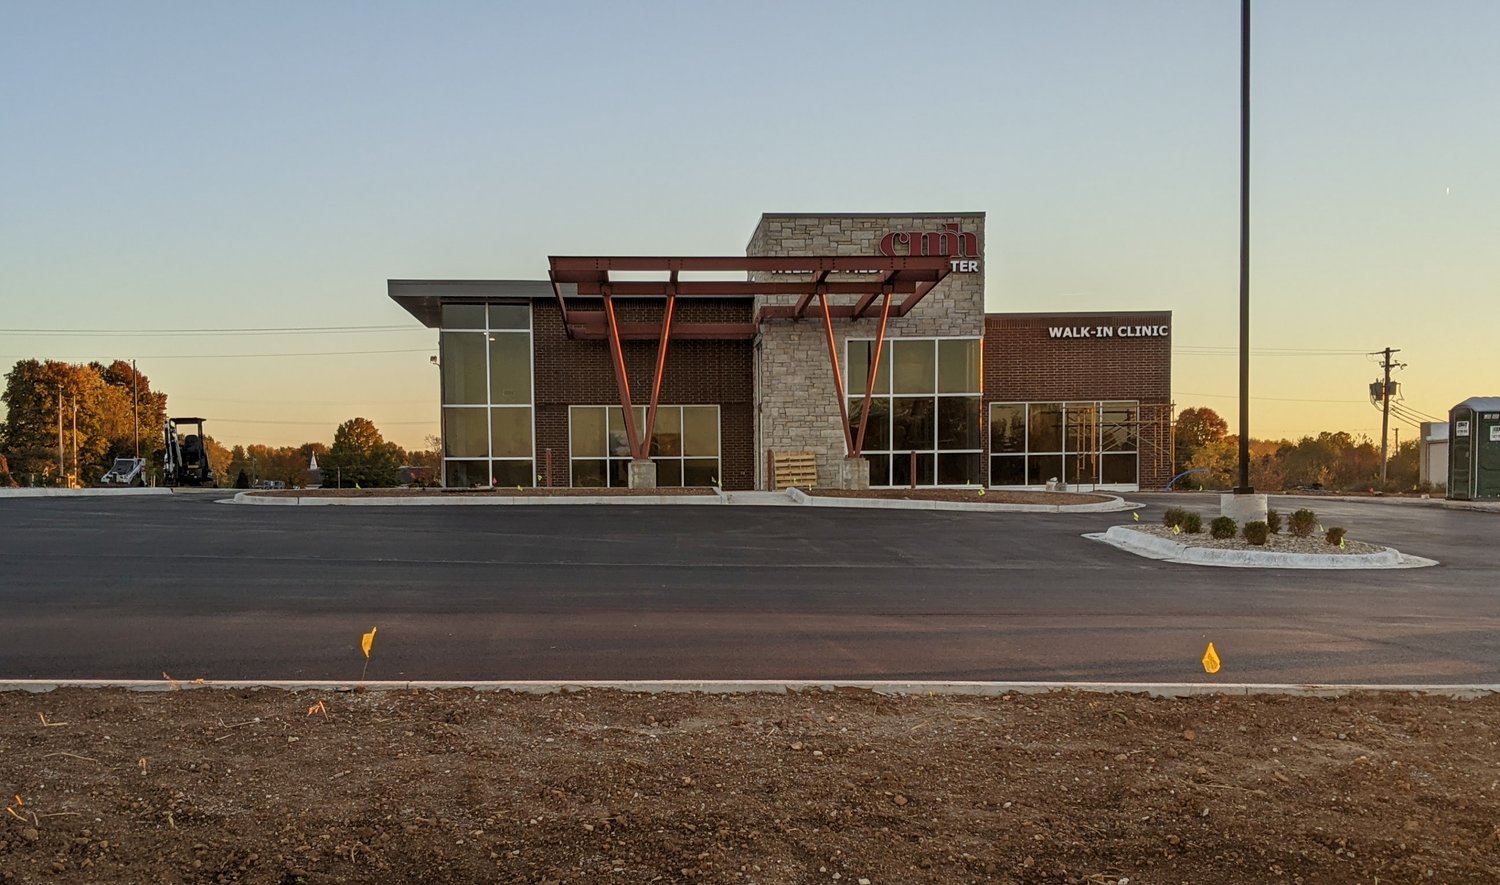 The CMH Willard Medical Center and Walk-in Clinic is scheduled to open Dec. 6.